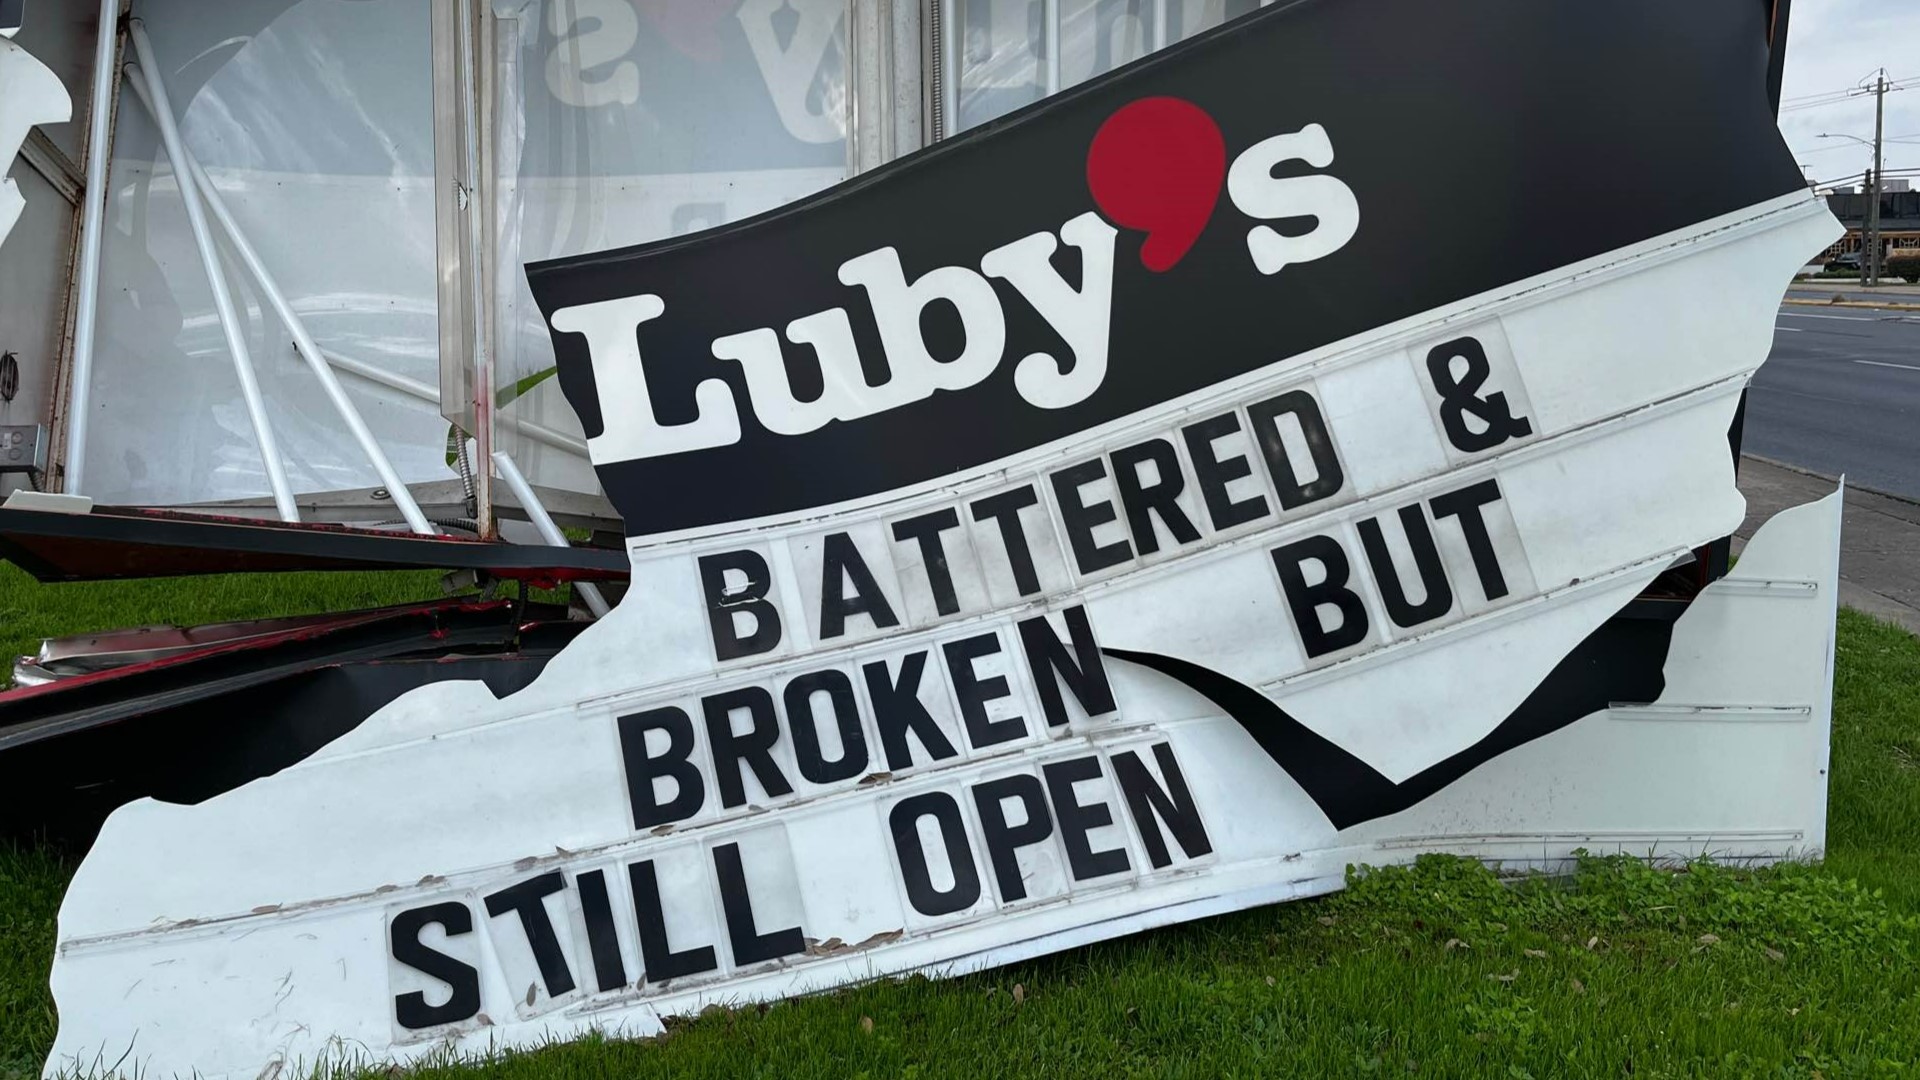 According to Luby's general manager Mike Foderetti, the sign was hit back in February and they're in the process of getting it fixed.